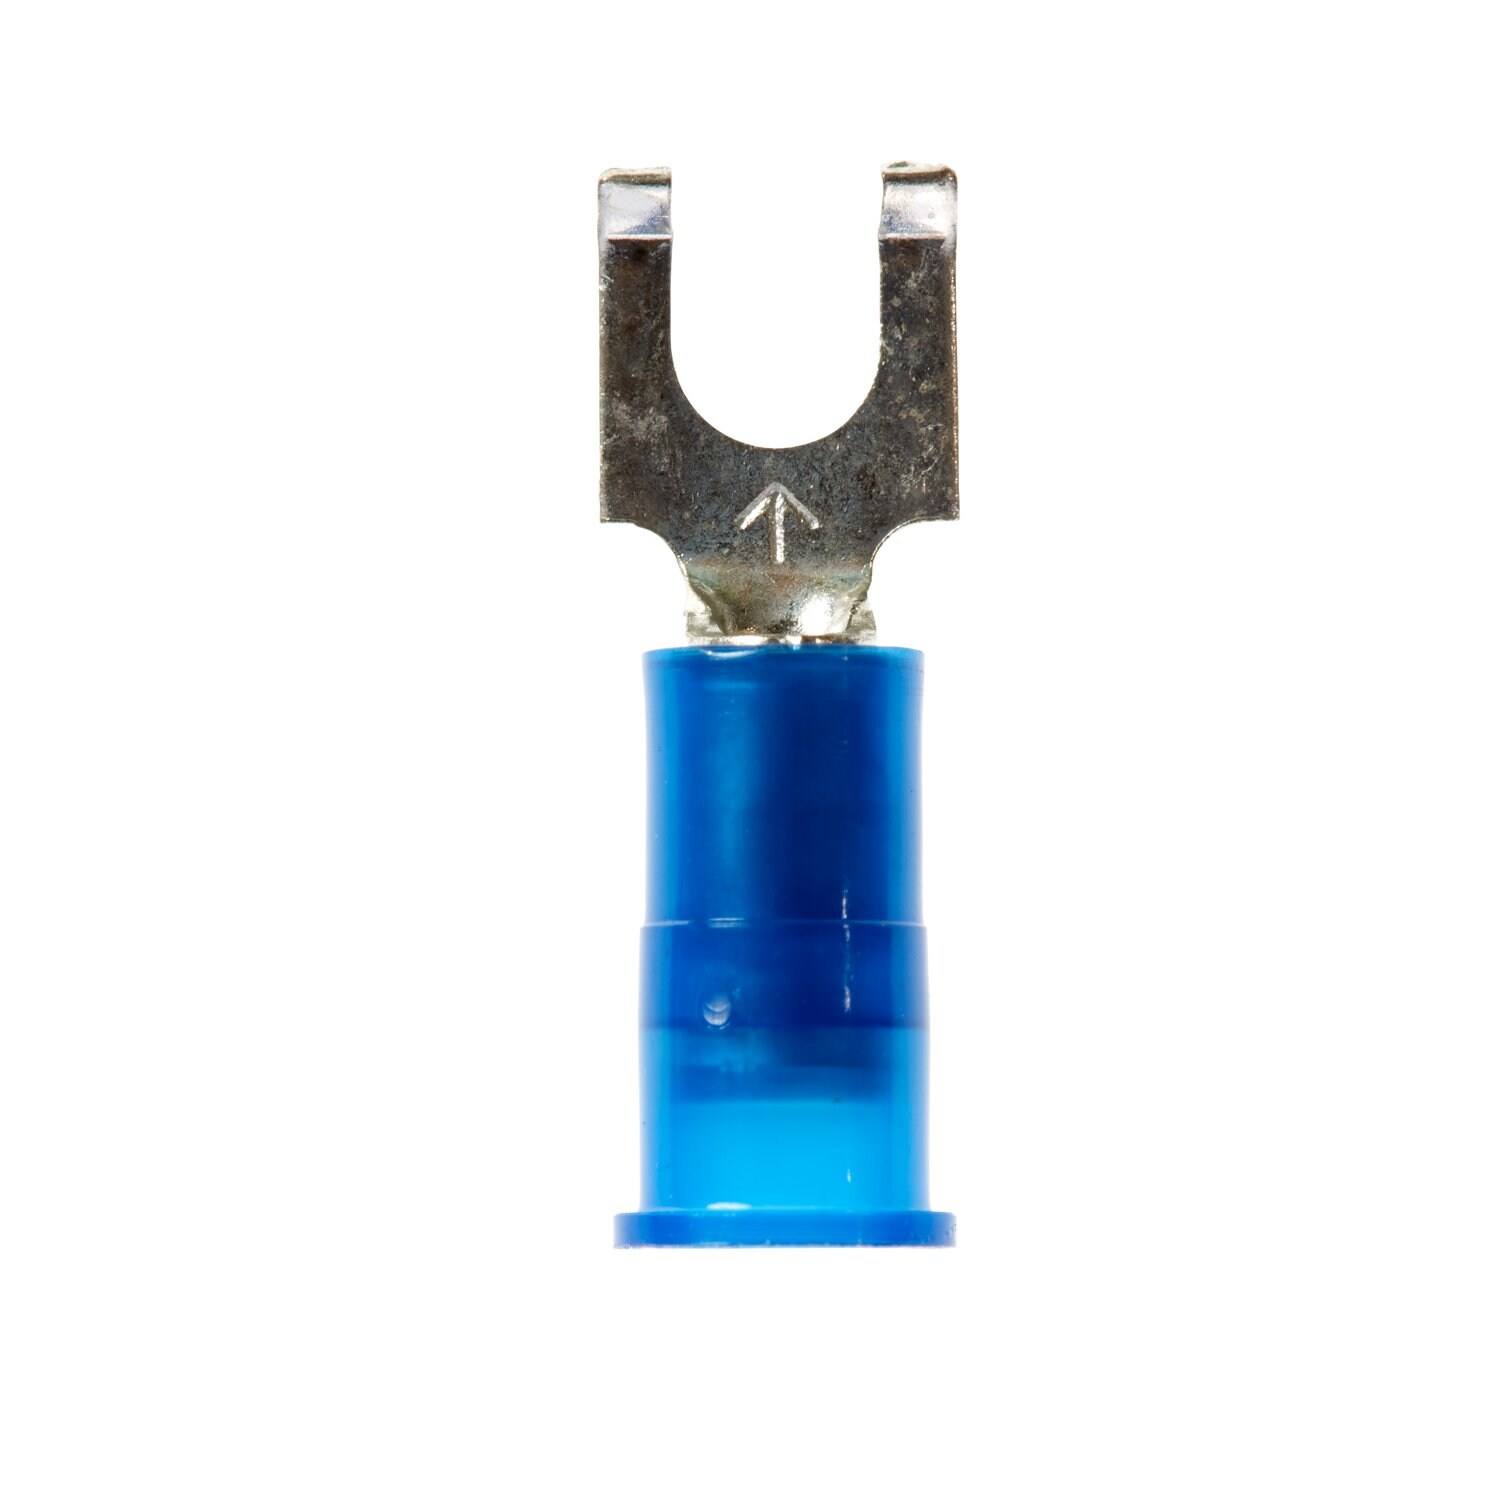 7100165313 - 3M Scotchlok Flanged Block Fork Nylon Insulated, 100/bottle,
MNG14-10FFBX, suitable for use in a terminal block, 500/Case